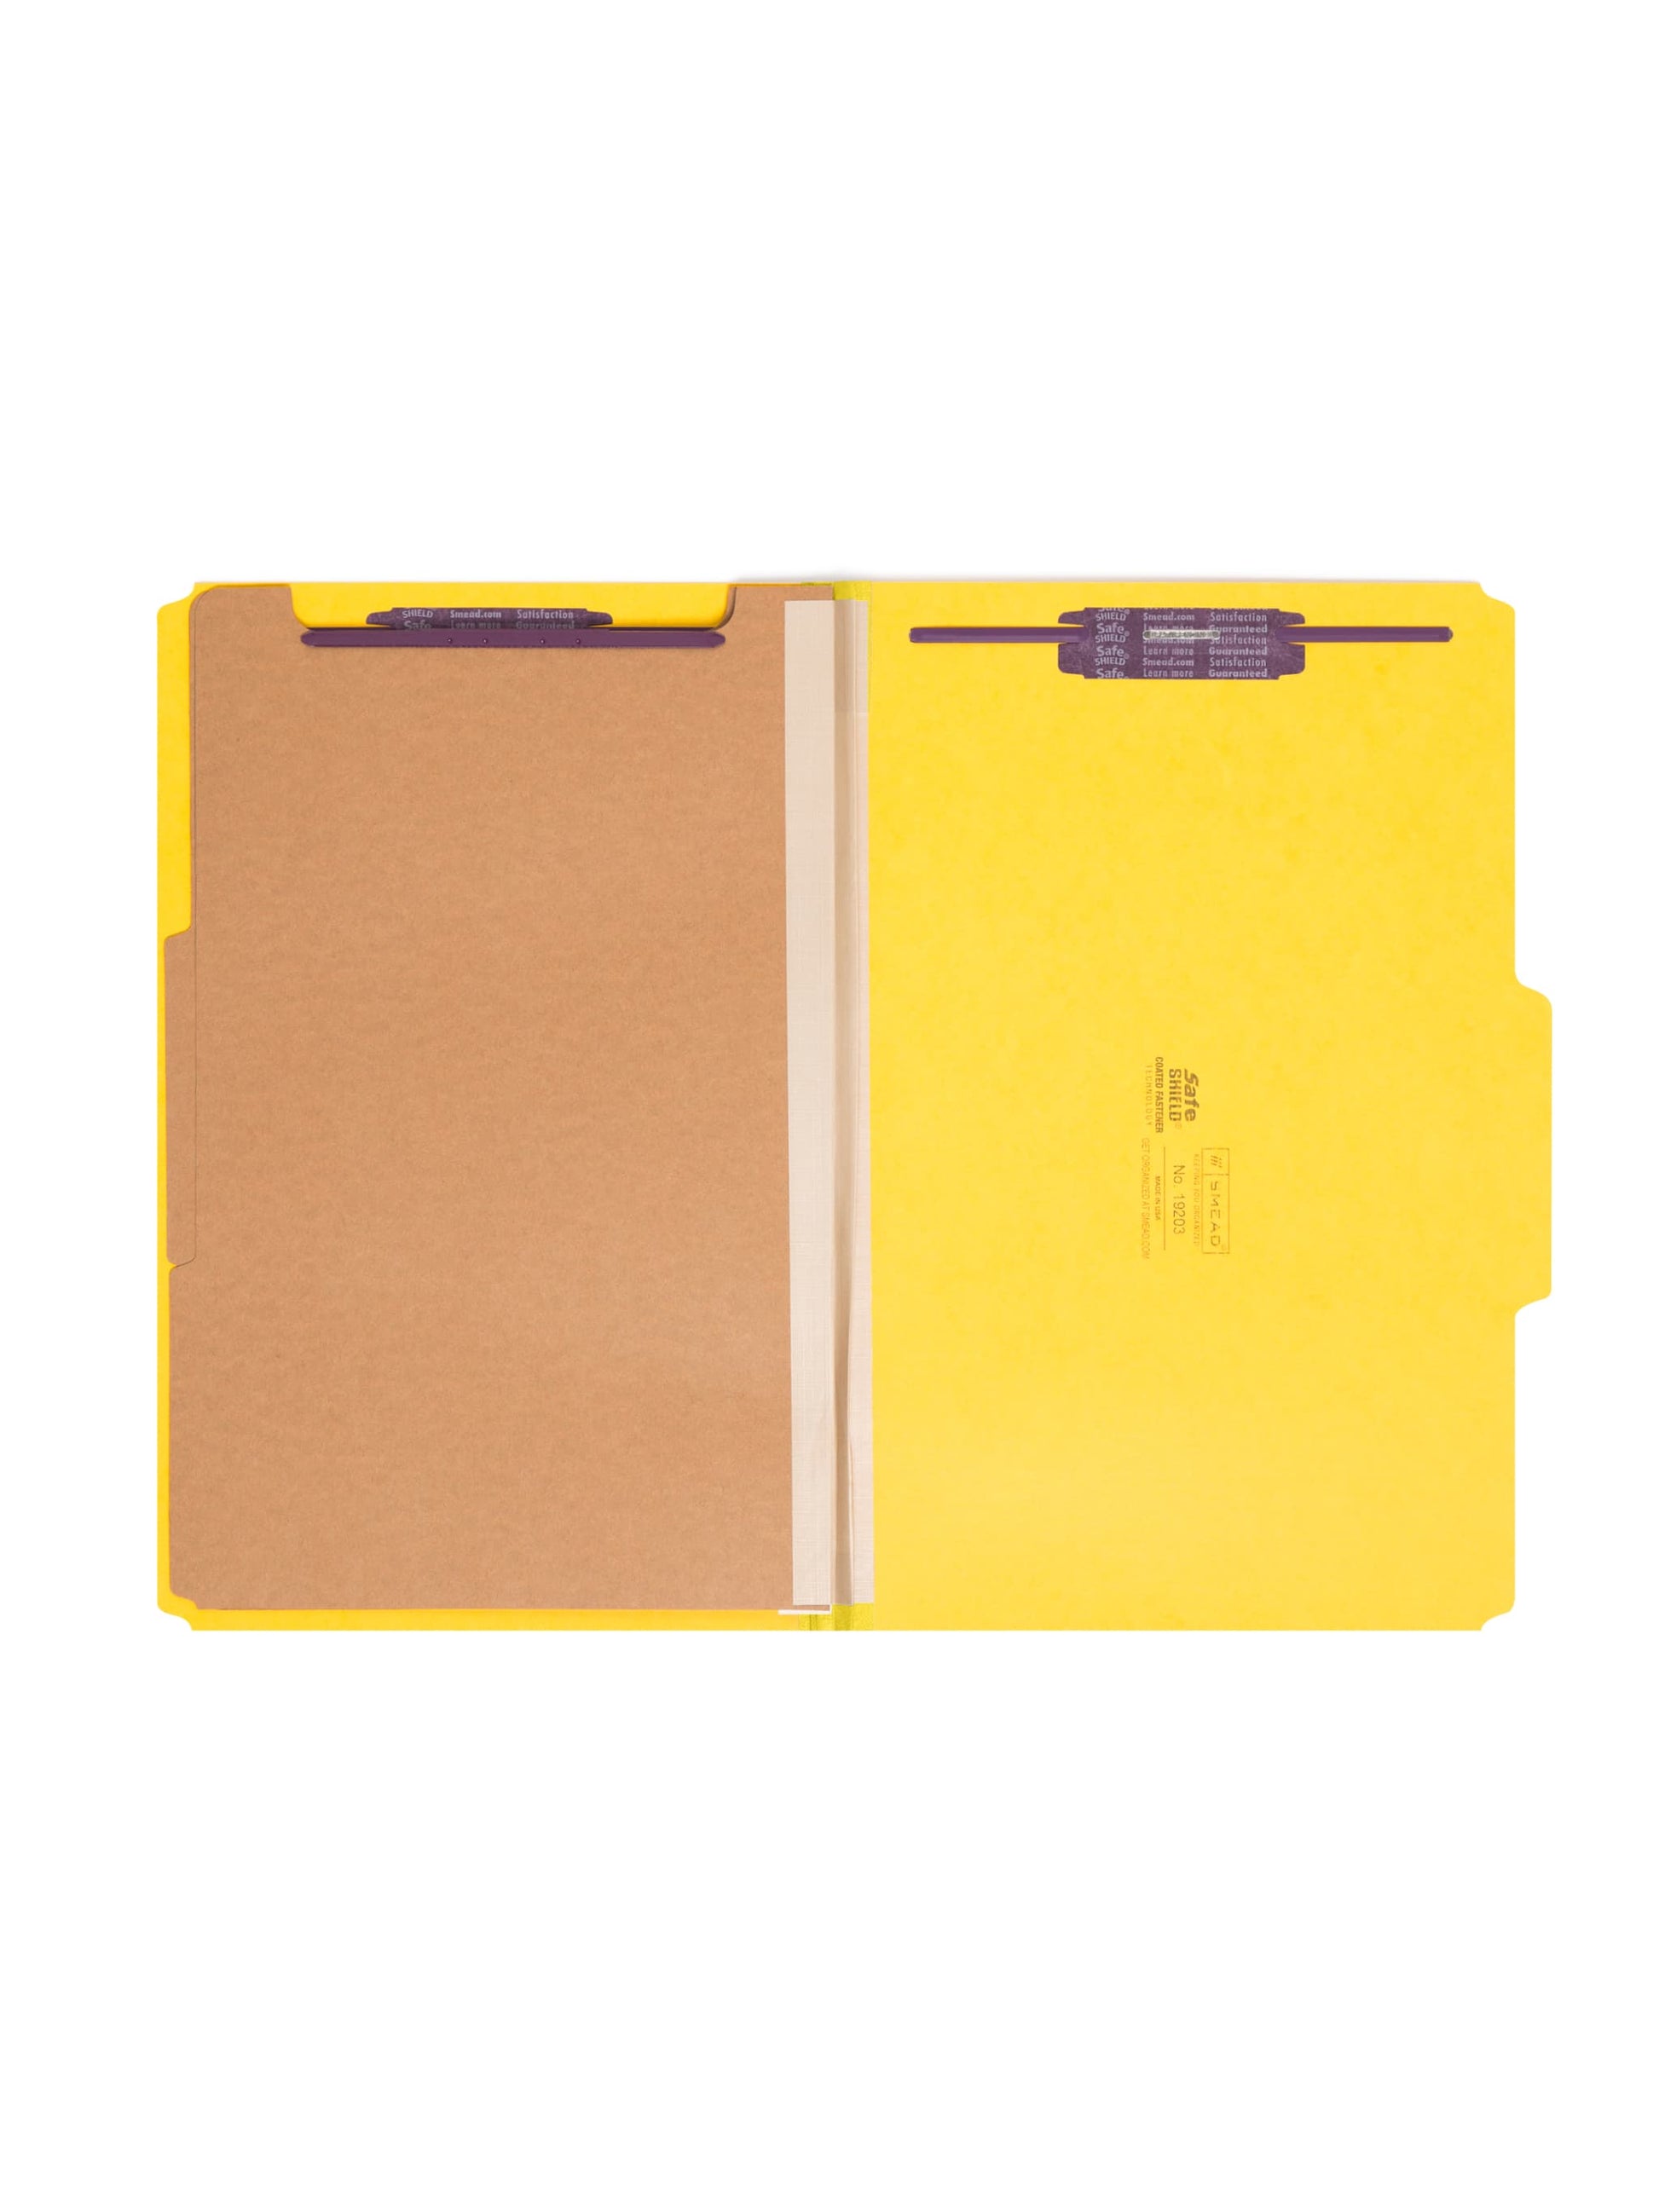 SafeSHIELD® Premium Pressboard Classification File Folders, 2 Dividers, 2 inch Expansion, 2/5-Cut Tab, Yellow Color, Legal Size, Set of 0, 30086486192034